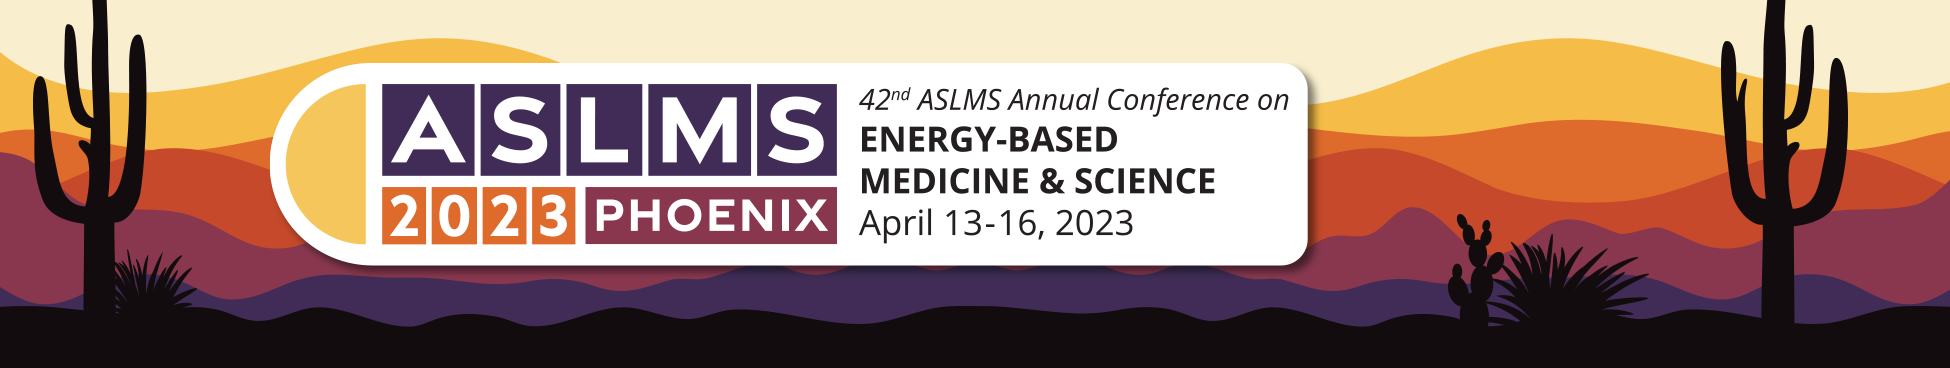 ASLMS 42nd Annual Conference